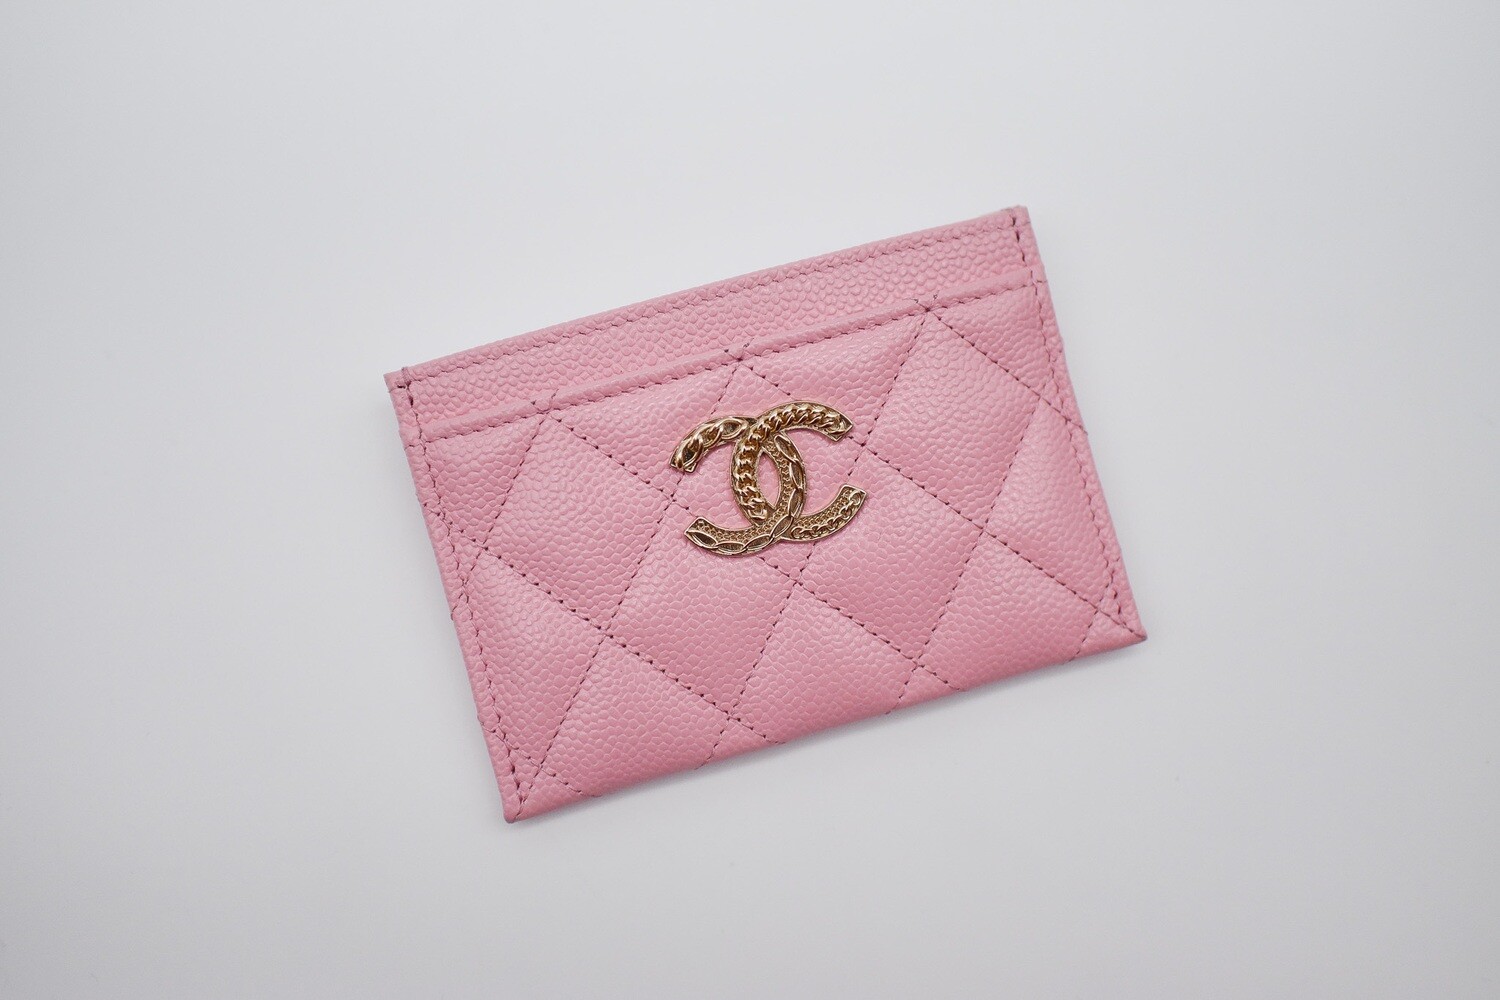 Chanel SLG Flat Cardholder with Large CC, 22K Pink Caviar Leather with Gold  Hardware, New in Box MA001 - Julia Rose Boston